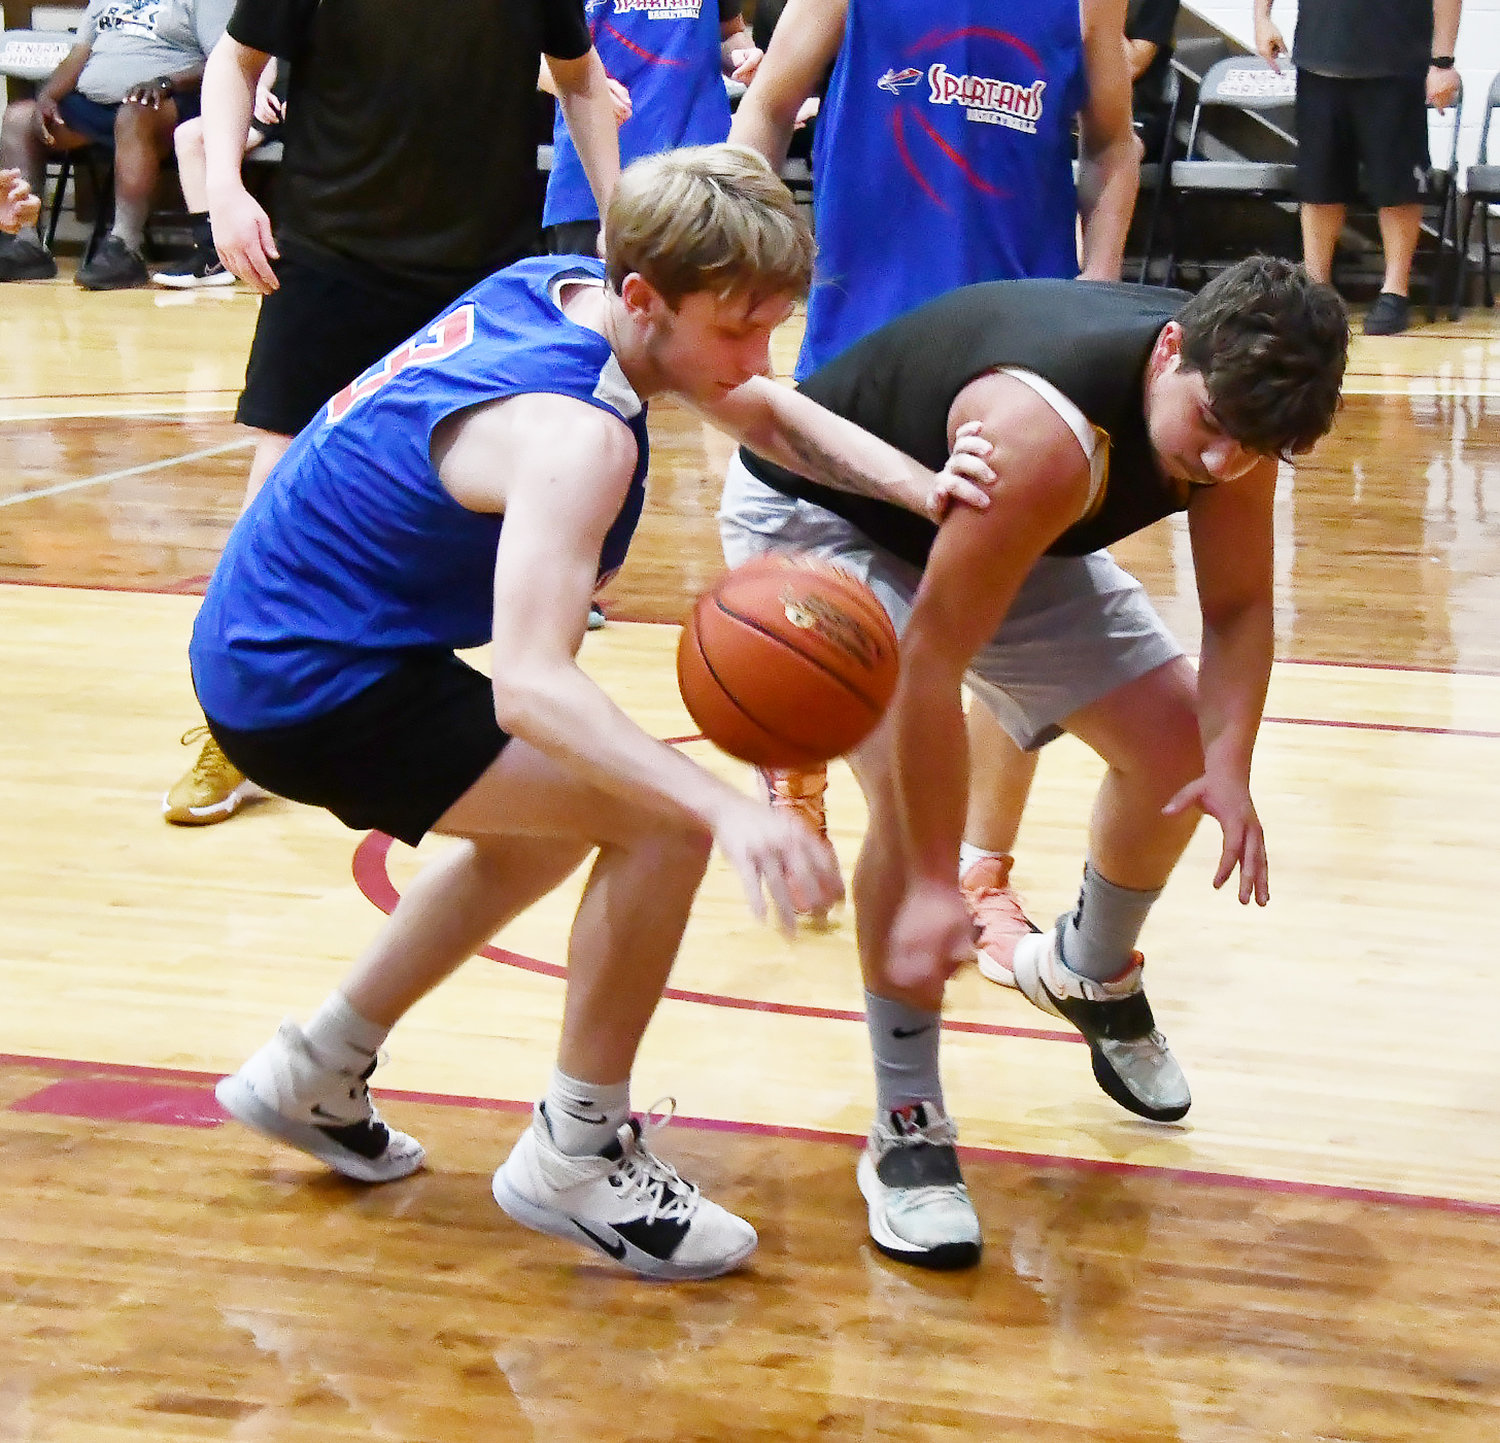 Jonah Black strips the ball from a Smithton player during Monday's scrimmage.